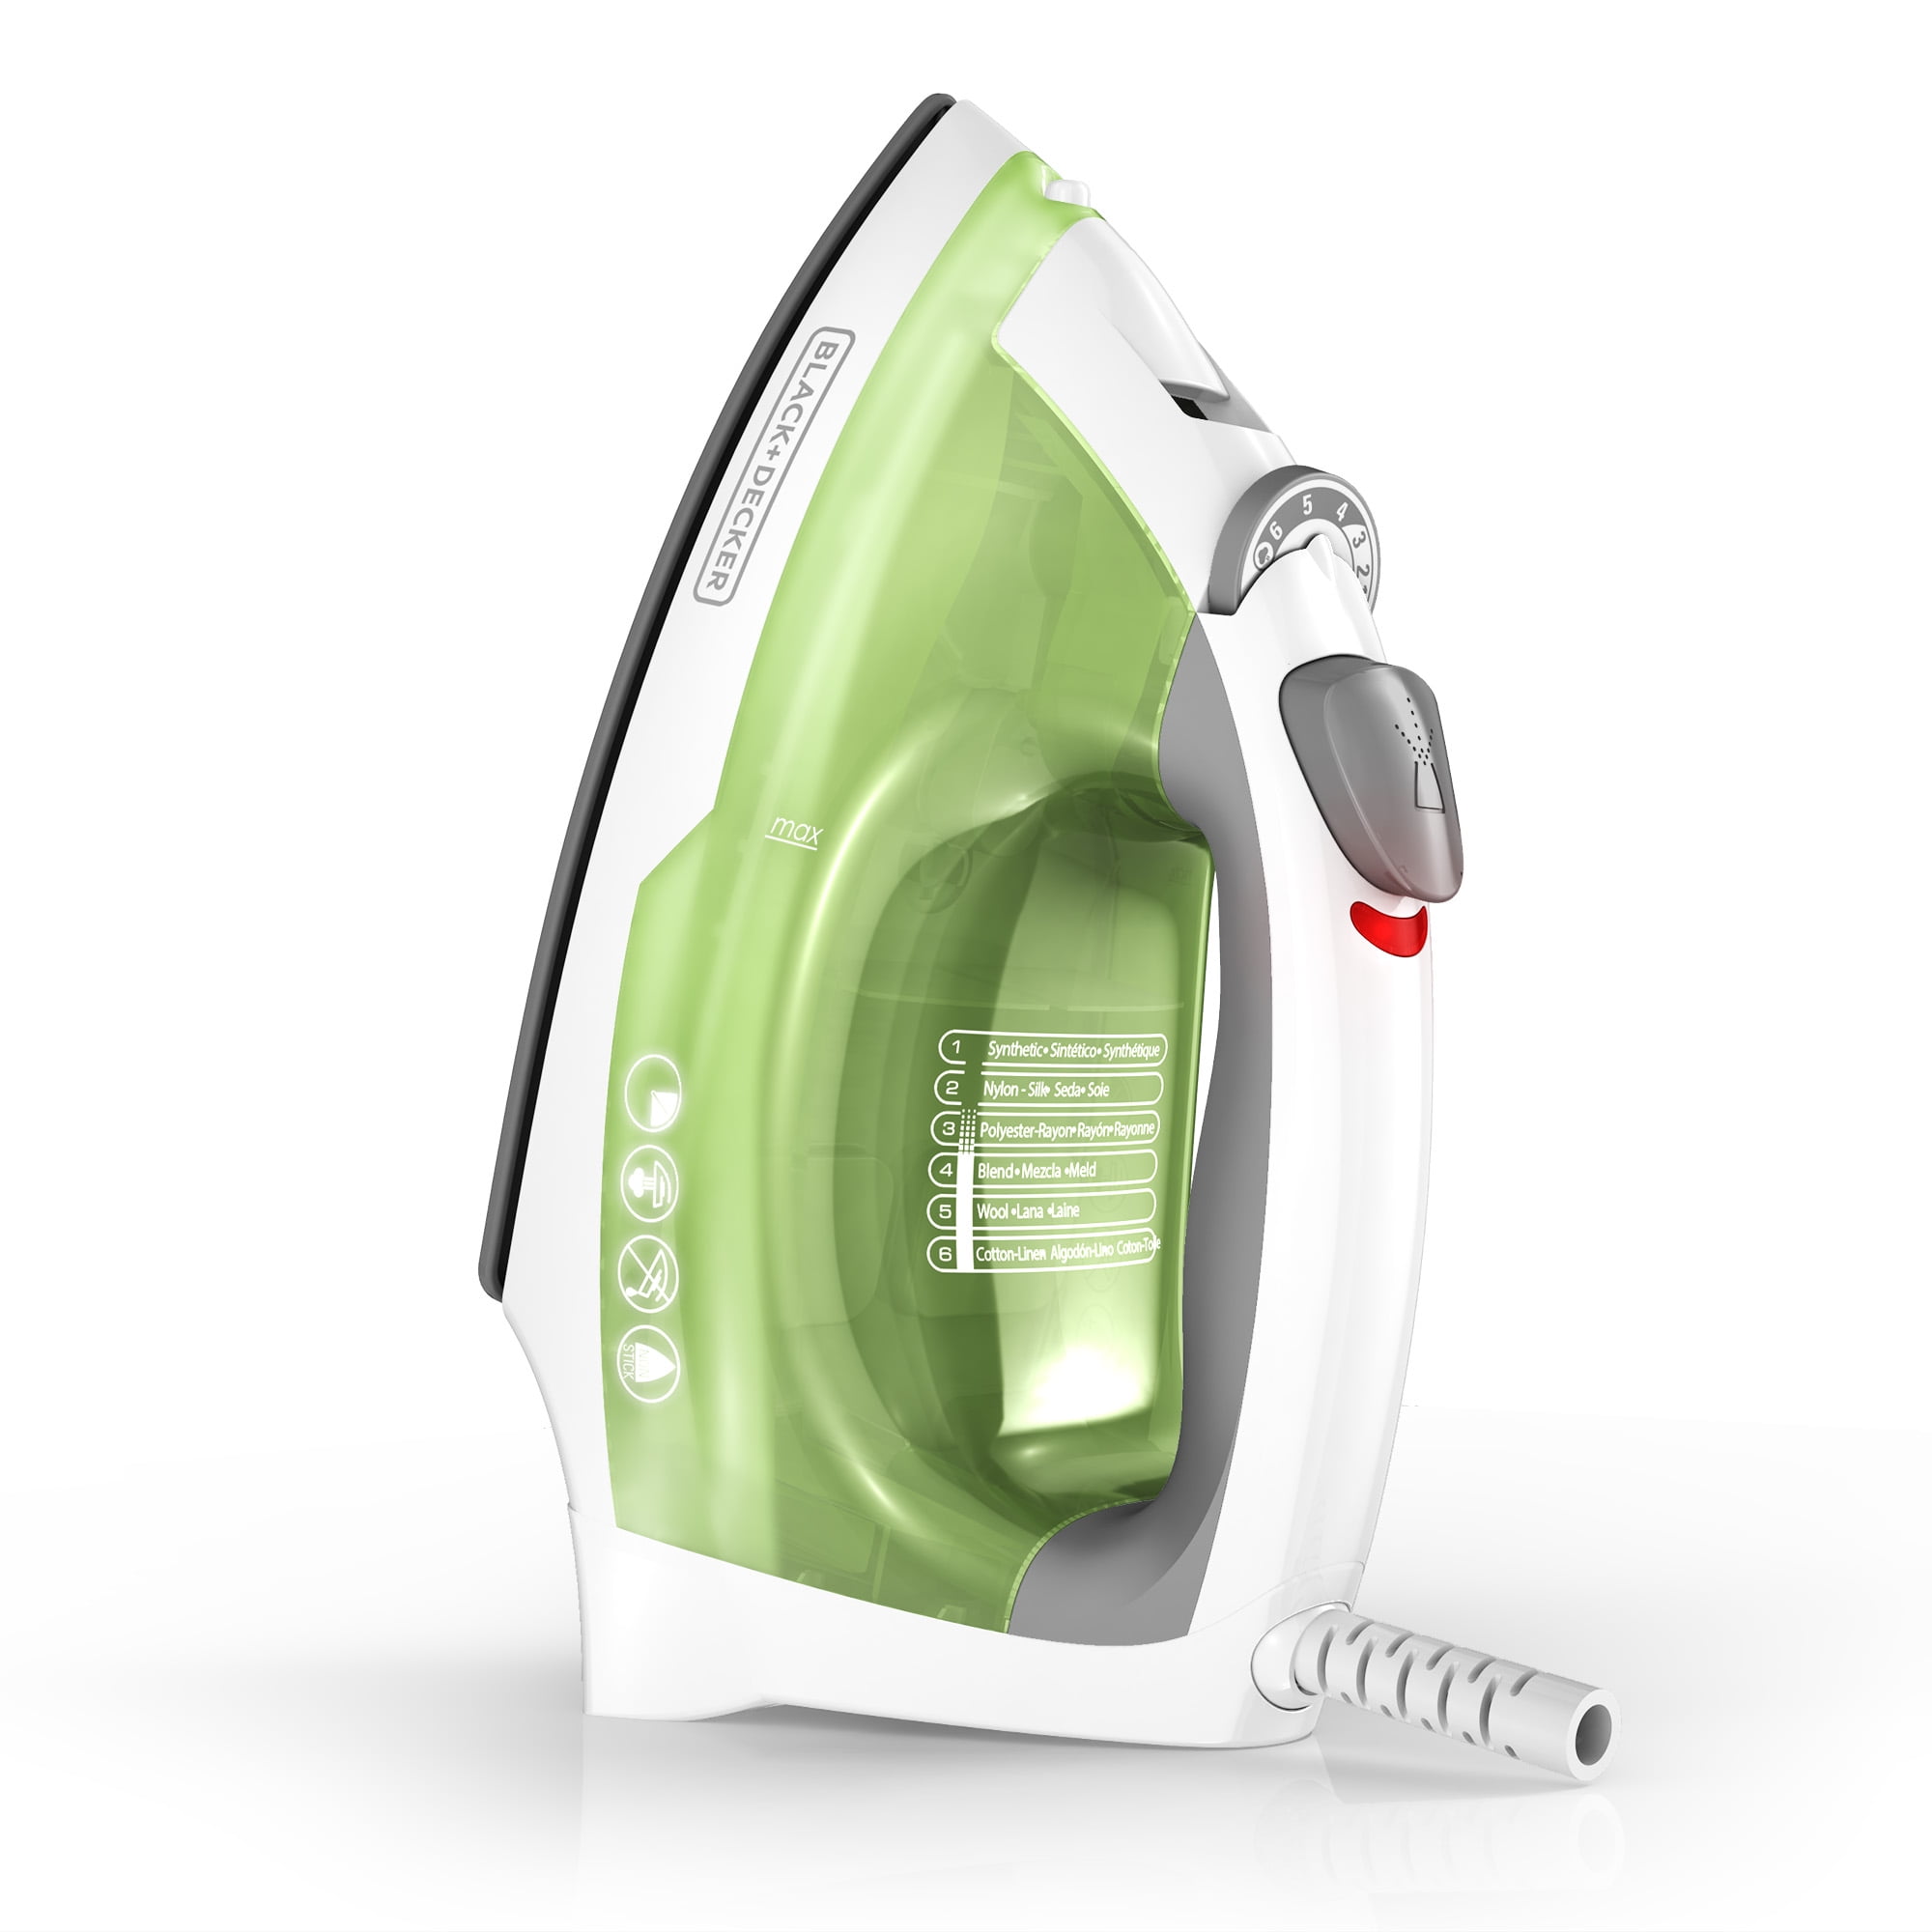 BLACK+DECKER Easy Steam Compact Iron - household items - by owner -  housewares sale - craigslist